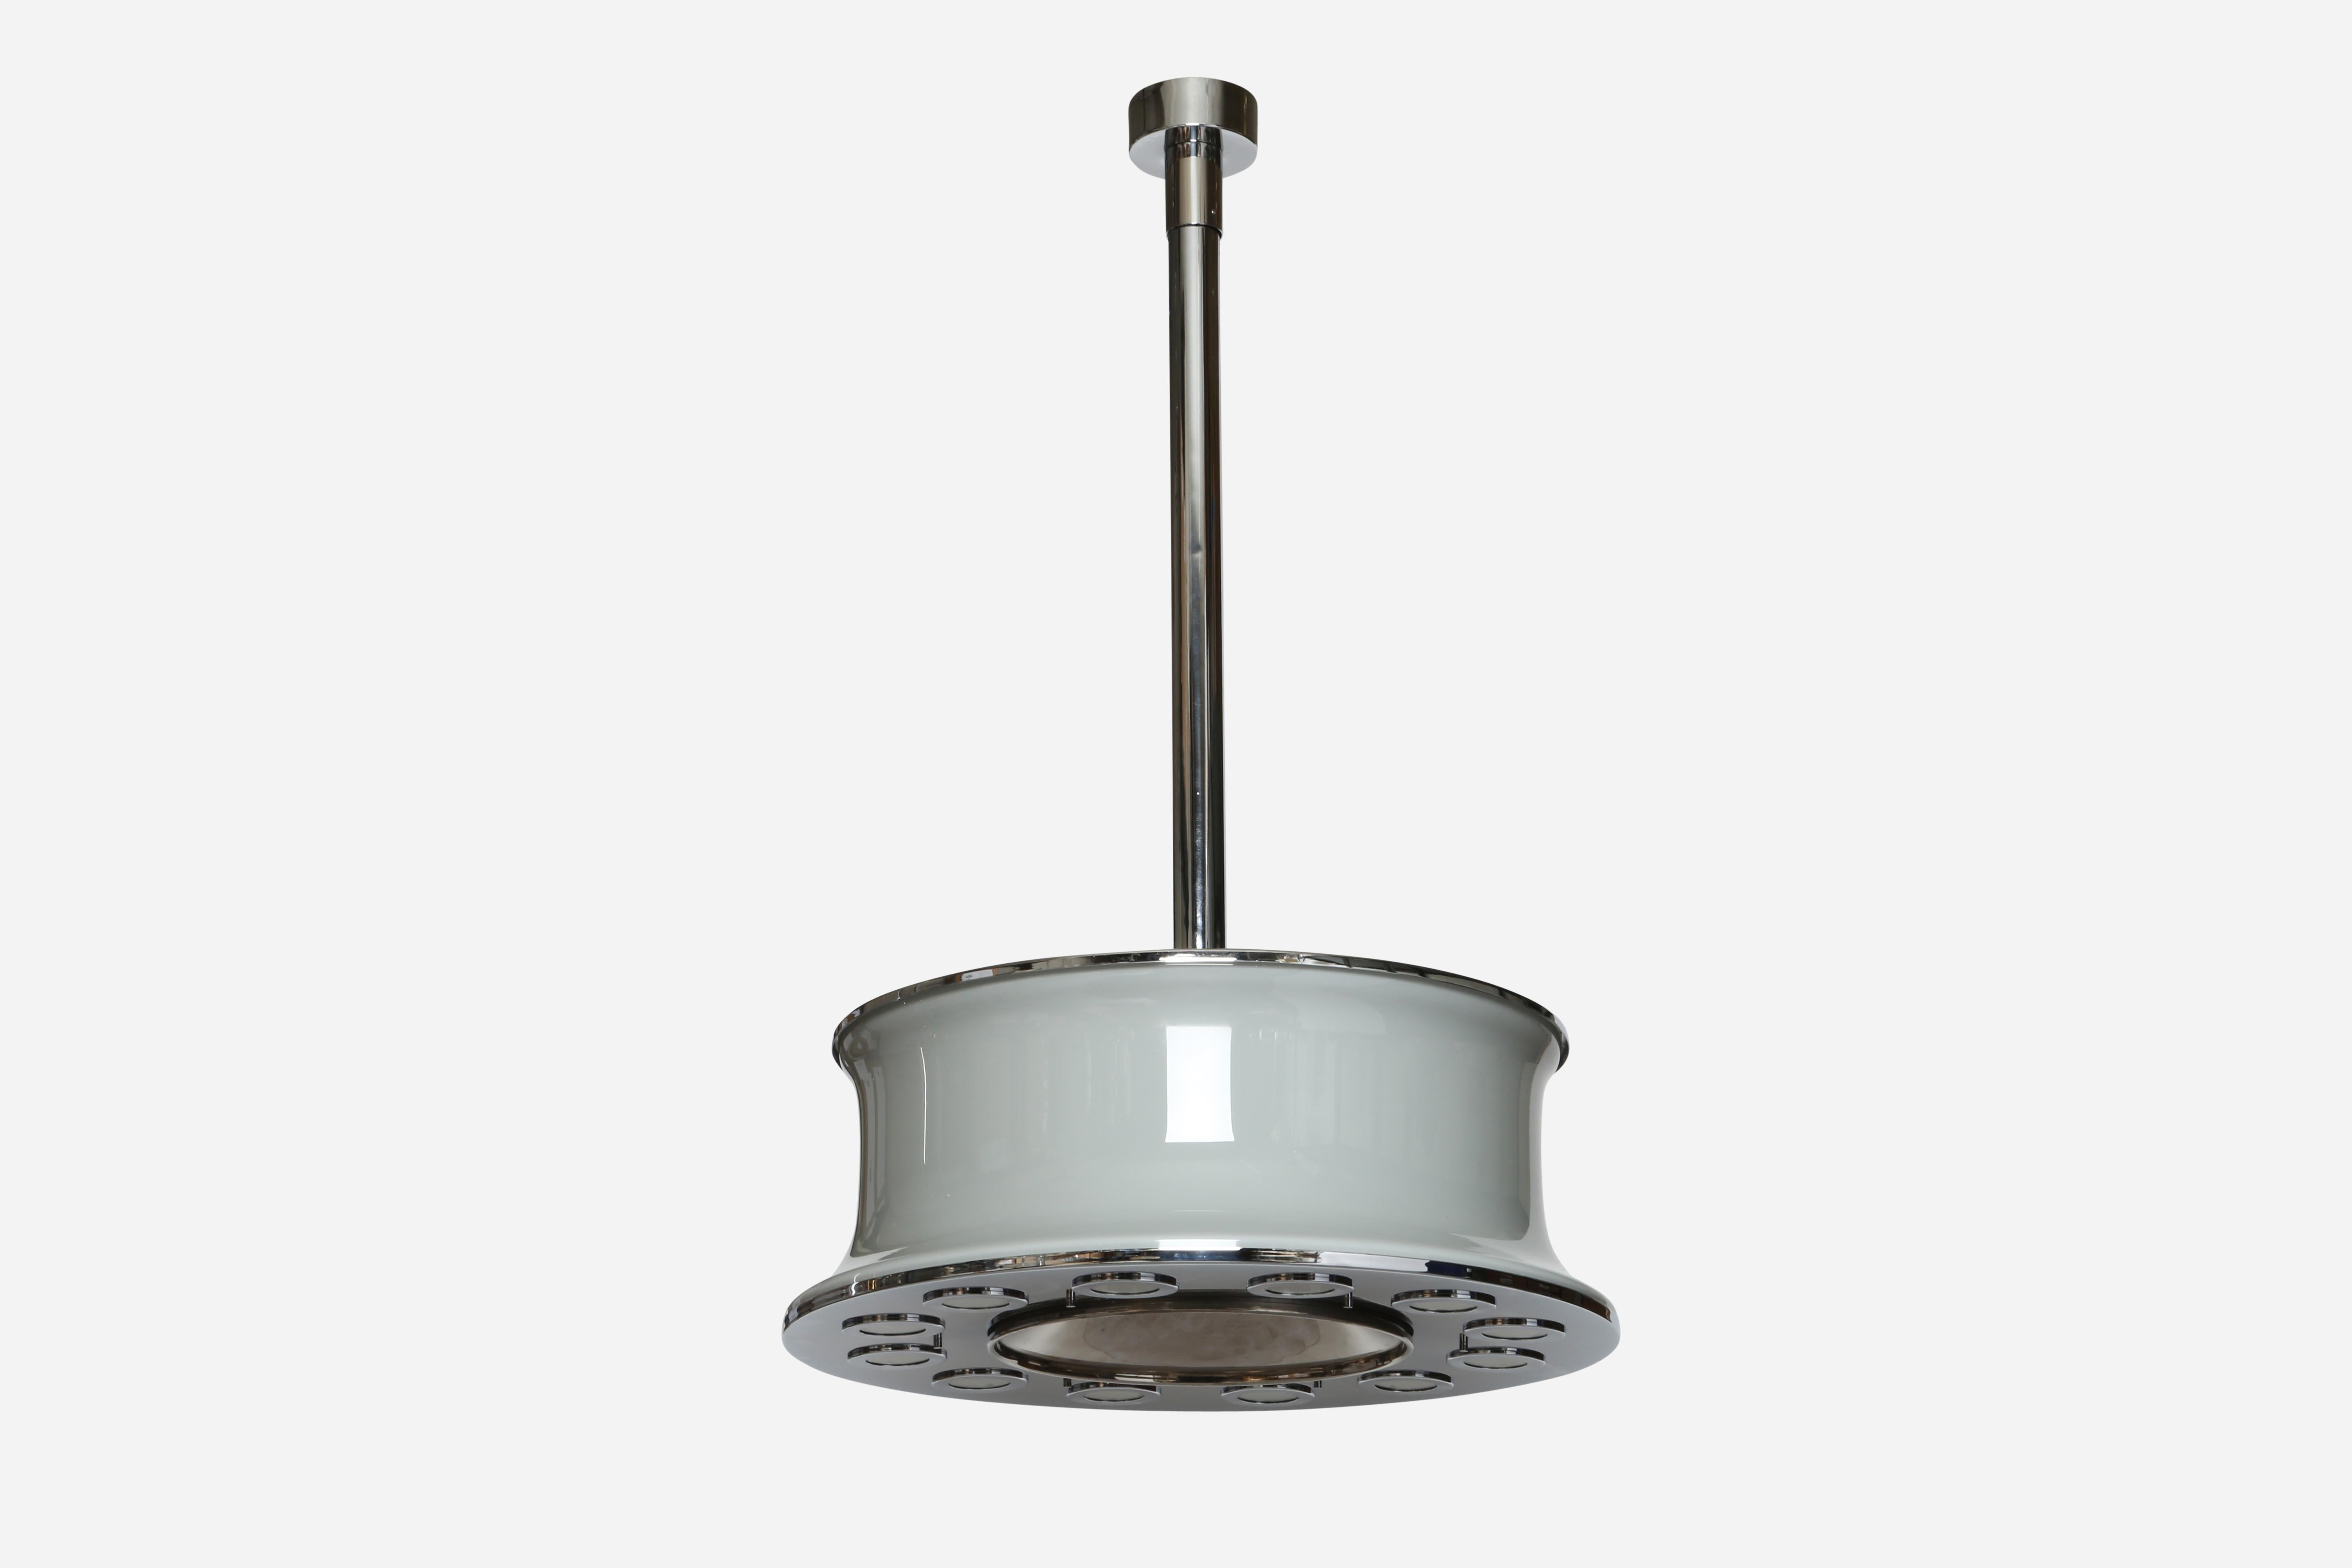 Pia Guidetti Crippa for Lumi ceiling pendant attributed.
Made in Italy, 1960s
Glass diffuser in light grey glass on the outside, white on the inside
Chrome plated metal.
Very rare, hard to find and impressive ceiling fixture.
Complimentary US